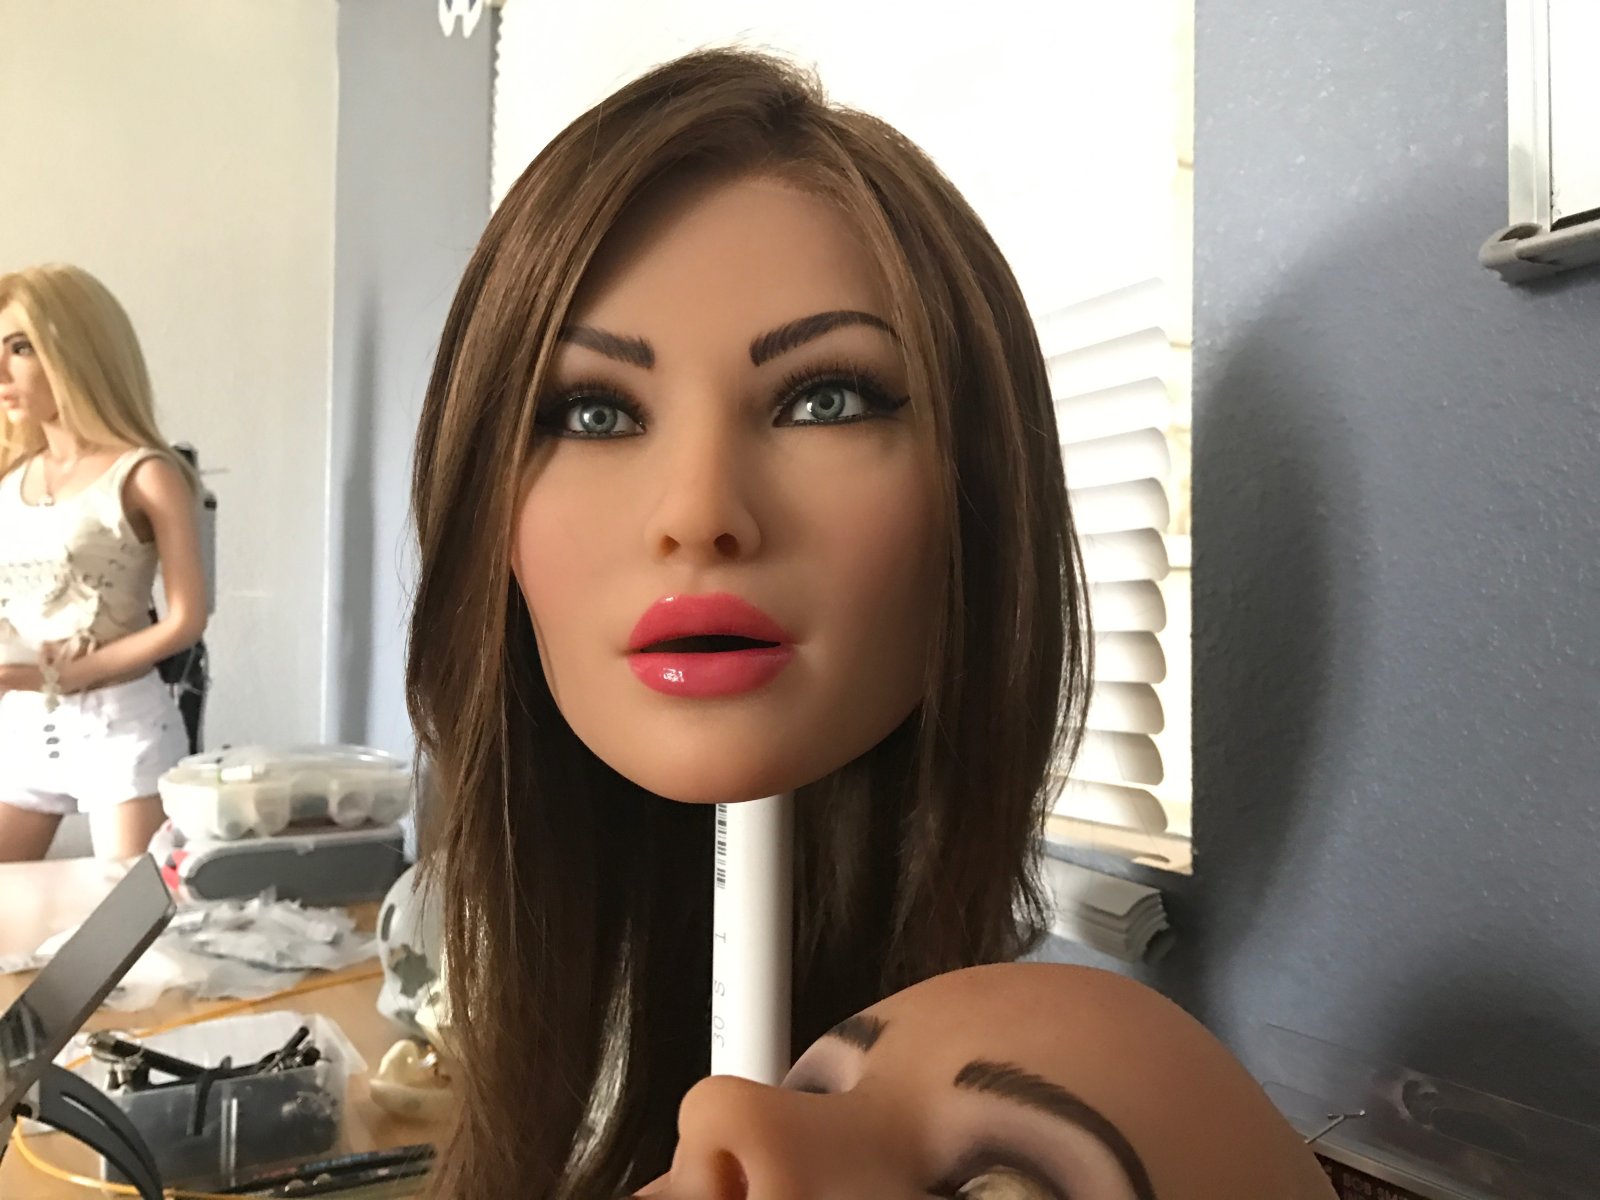 Realdolls First Sex Robot Took Me To The Uncanny Valley 2